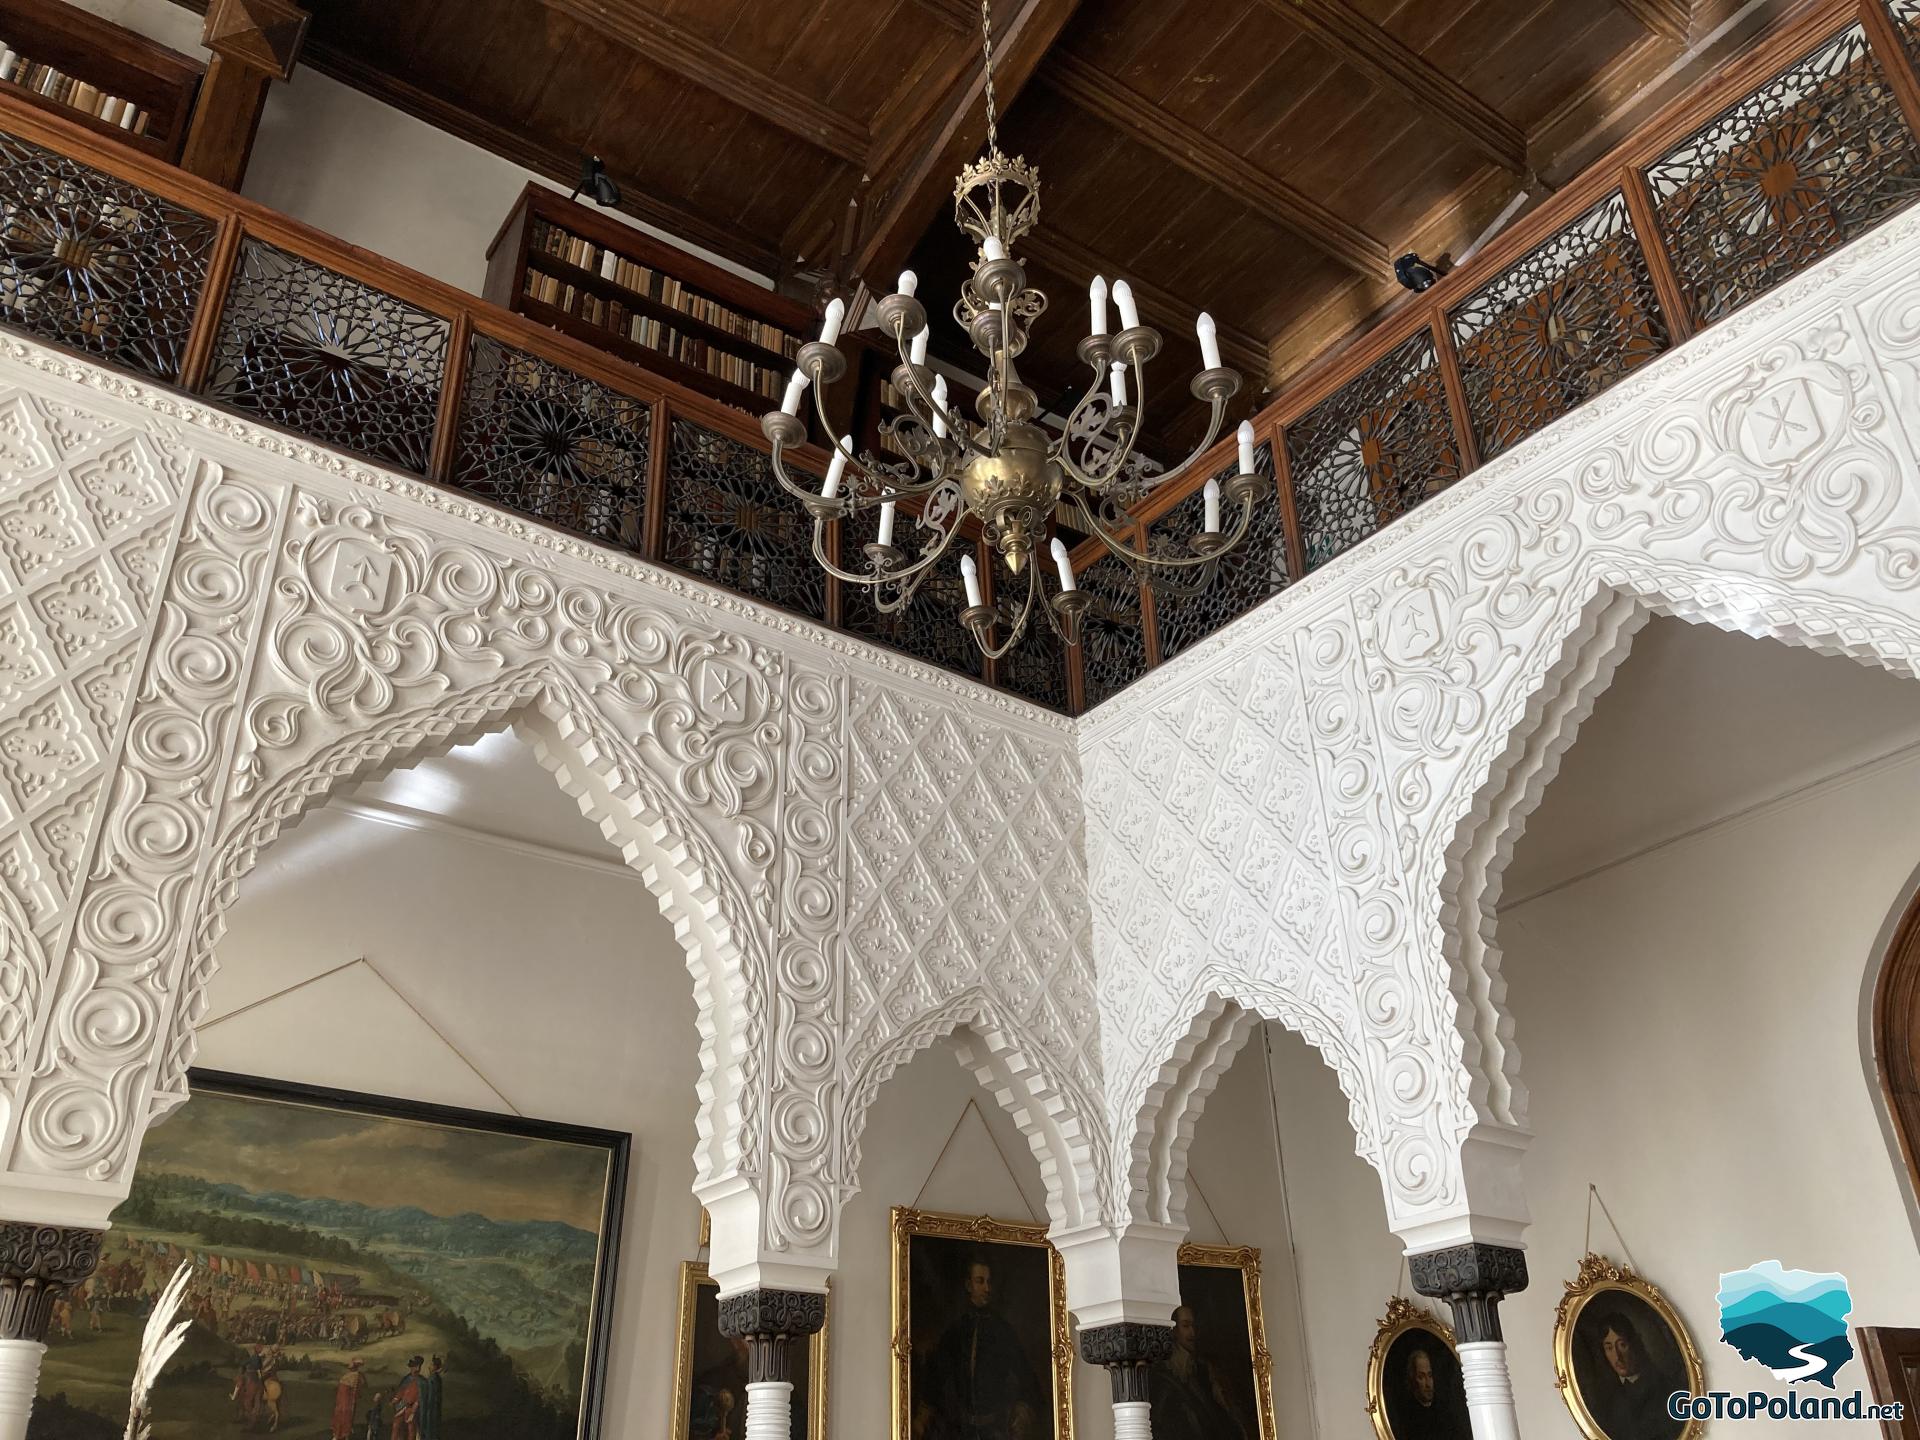 Arabic, white column tops, shelves with books on the first floor, hanging chandelier